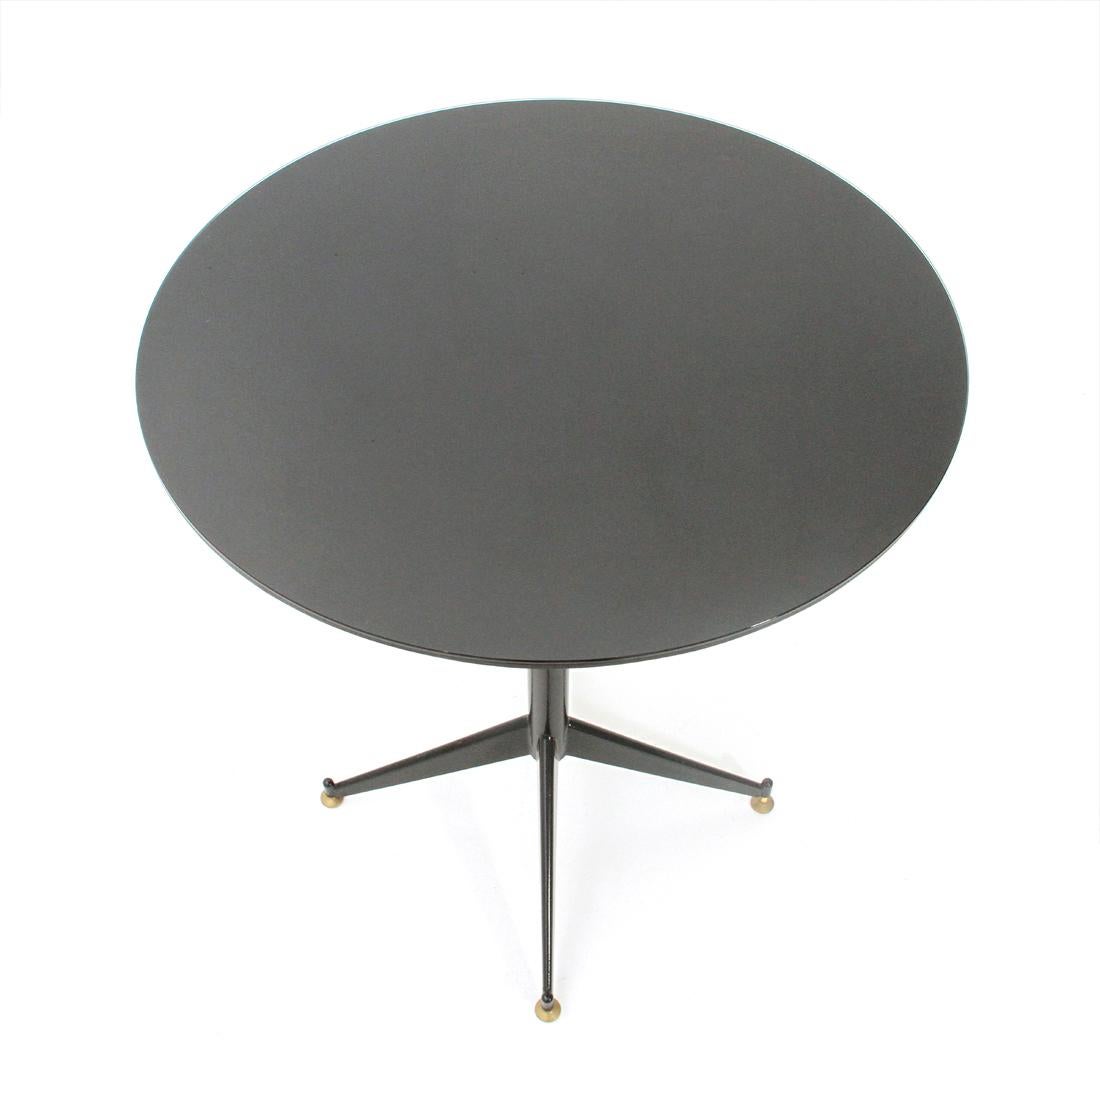 Italian manufacturing table from the 60s.
Black painted metal structure with brass feet.
Wooden top with tapered edge and black glass.
Good general conditions.

Dimensions: Length 60 cm, depth 60 cm, height 72 cm.